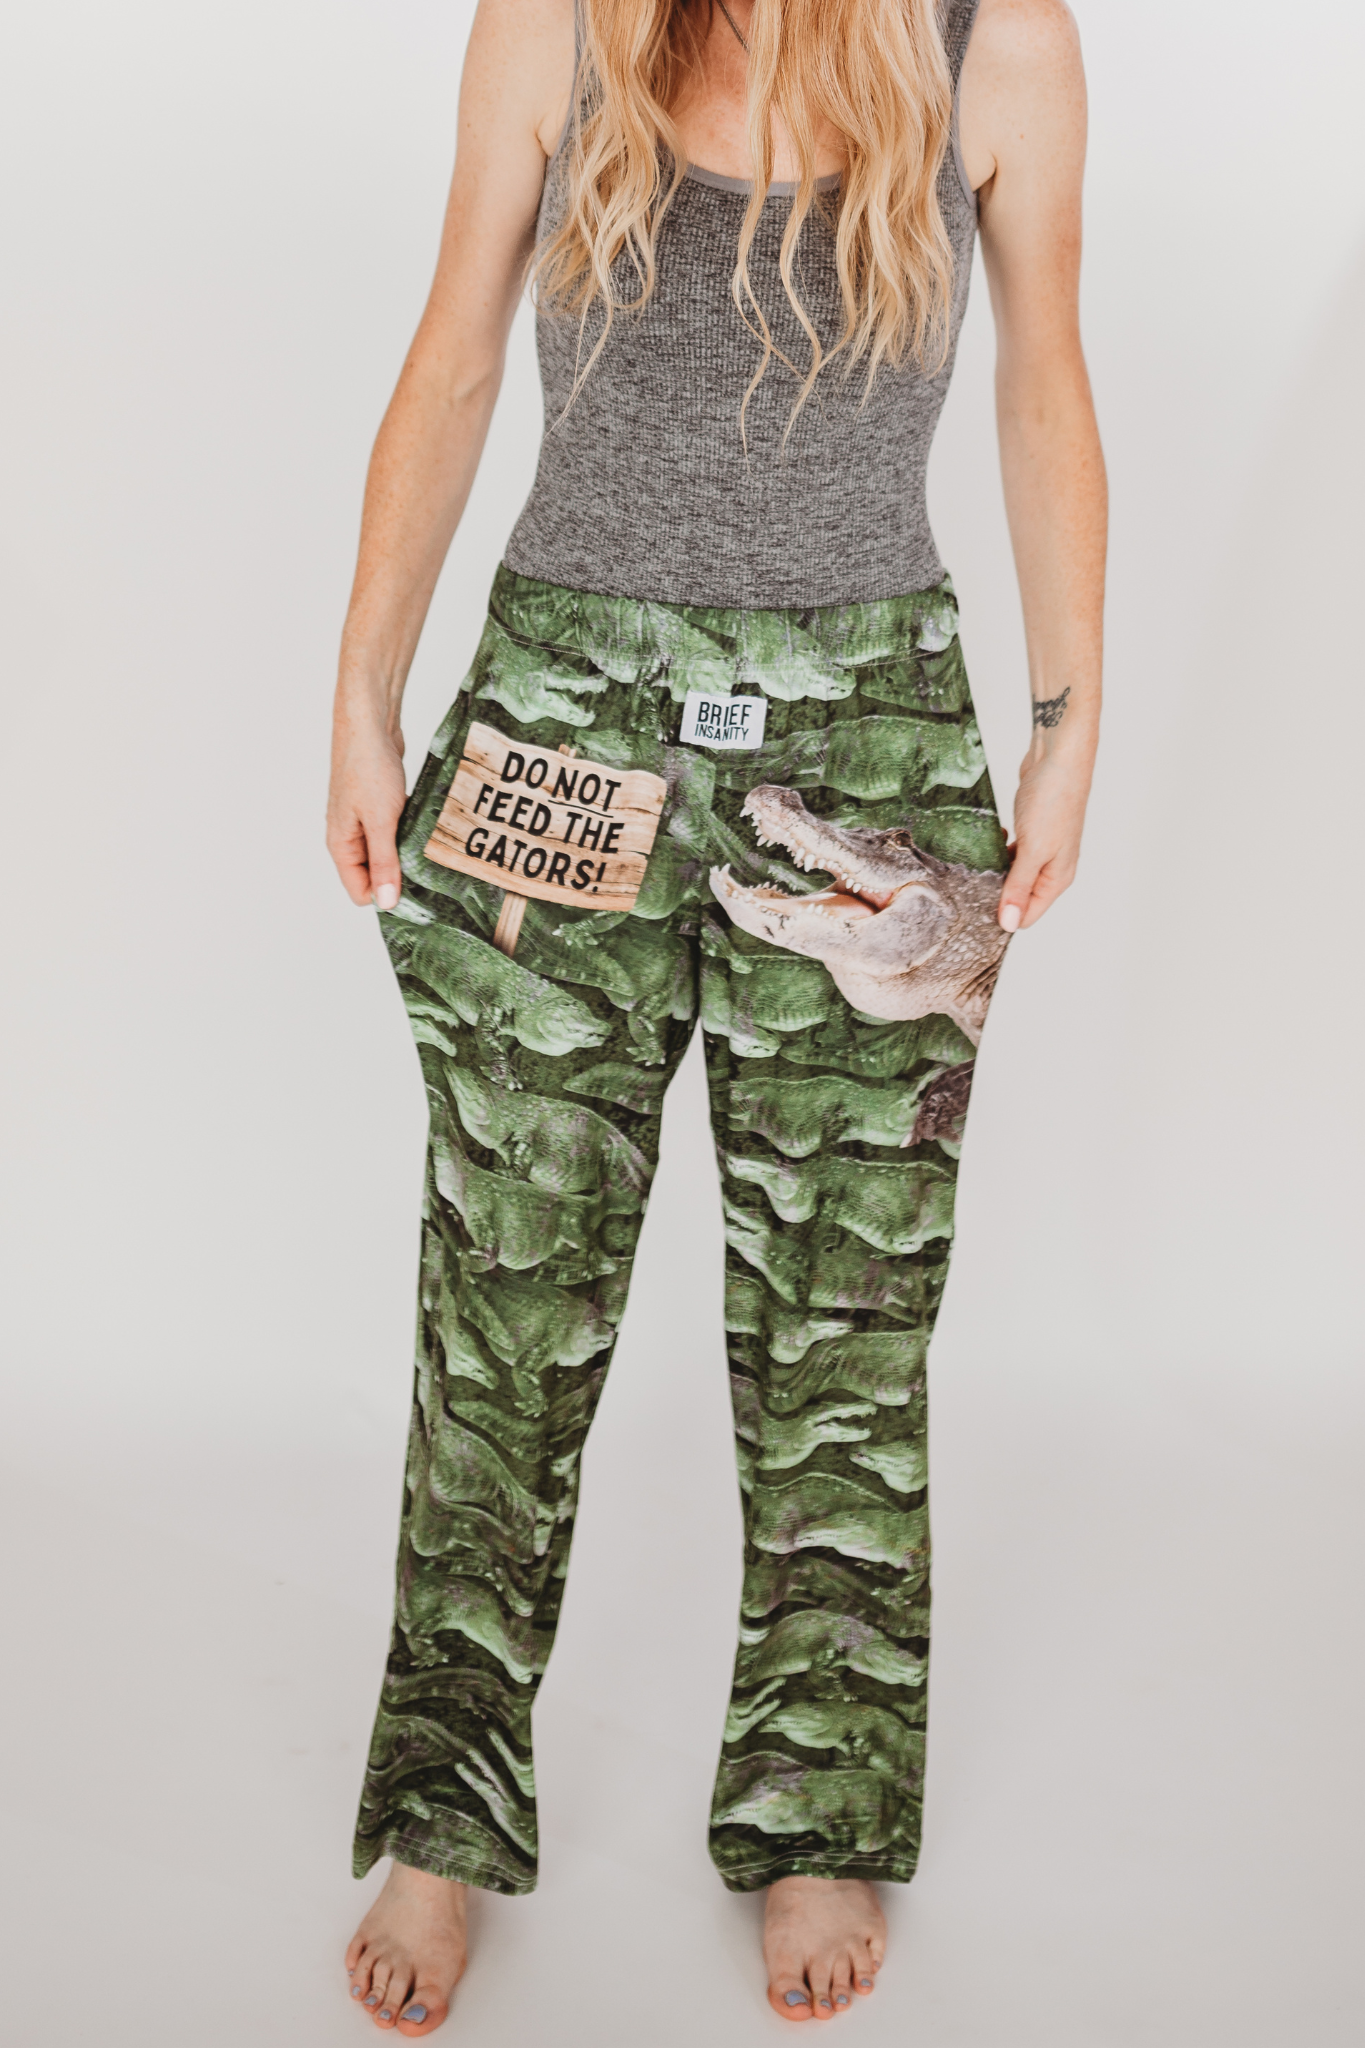 Image of model wearing Do Not Feed The Gators pajama lounge pants front view (white background)